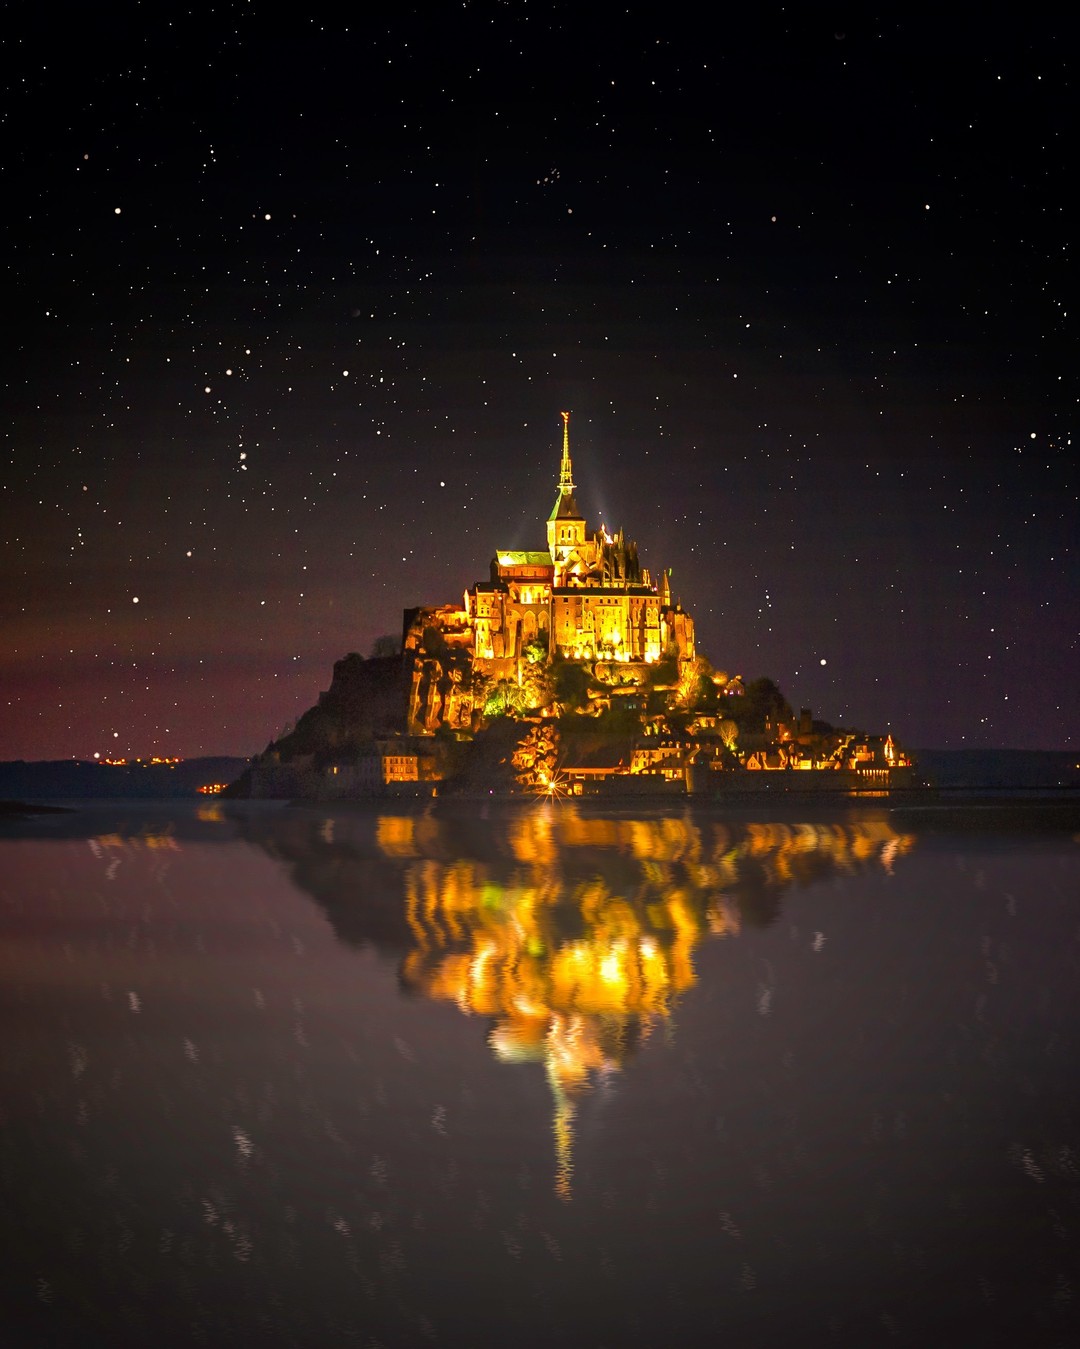 The fairytale complex of Mont Saint-Michel in Normandy, France, dates as far back as the 8th century. ⁣
⁣
Legend has it that the archangel Michael appeared in 708 to the bishop of Avranches and instructed him to build a church on the rocky islet. A monastery and abbey were erected over subsequent centuries, complete with fairytale flourishes: soaring spires and hulking ramparts that rise dramatically from the sea.⁣
⁣
Mont Saint-Michel is famed for its tidal variations. It offers extraordinary views even when the tide is out, but when the tide is in and night descends, the magic truly happens. We explored eerily empty alleys and pathways late into the evening where all was quiet but the wishing of the waves.⁣
-⁣
-⁣
-⁣
-⁣
-⁣
-⁣
#MontSaintMichel #Normandie #France #MagnifiqueFrance #Manche #Normandy #Castle #Bretagne #BeautifulFrance